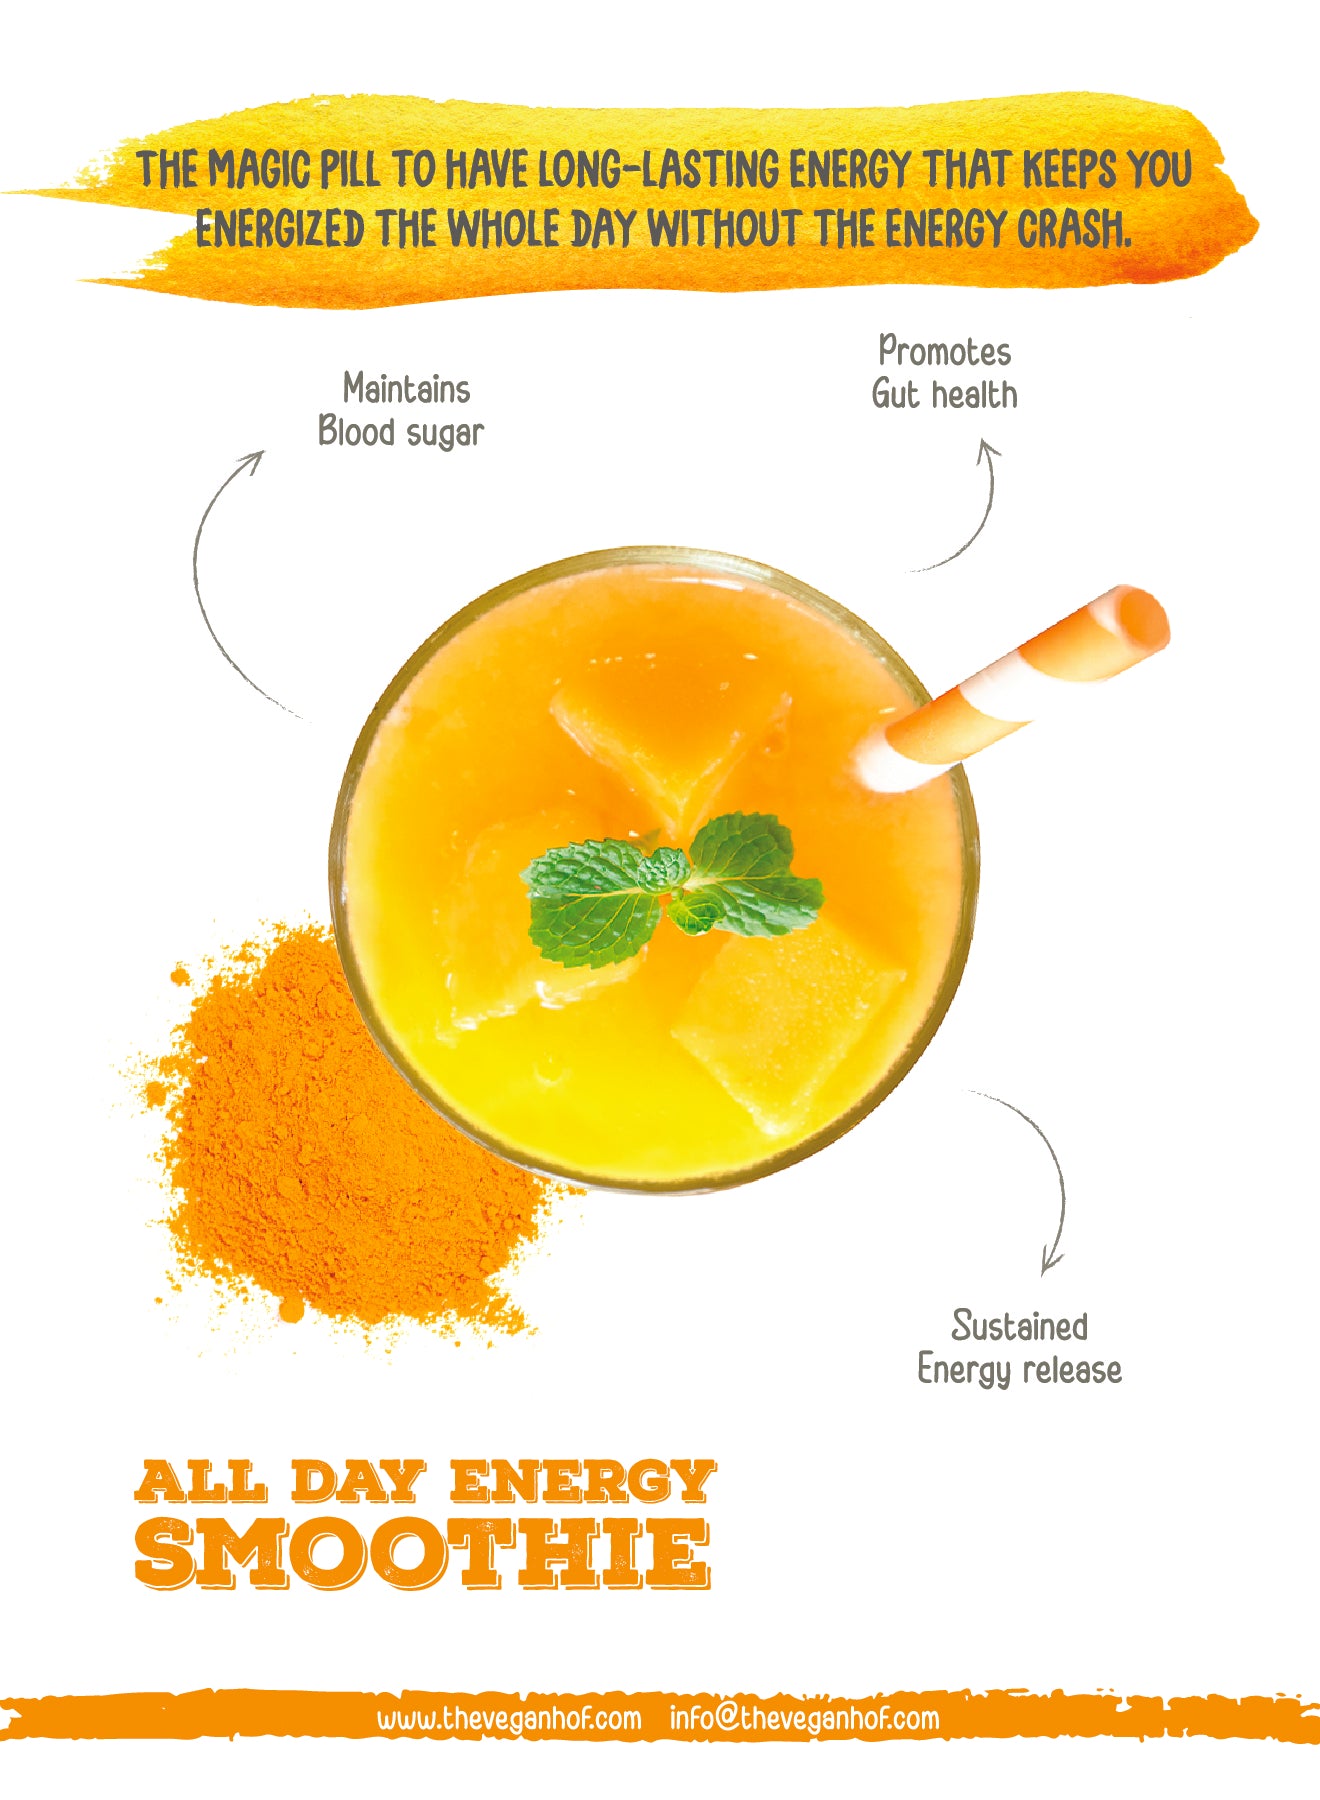 All day energy smoothie